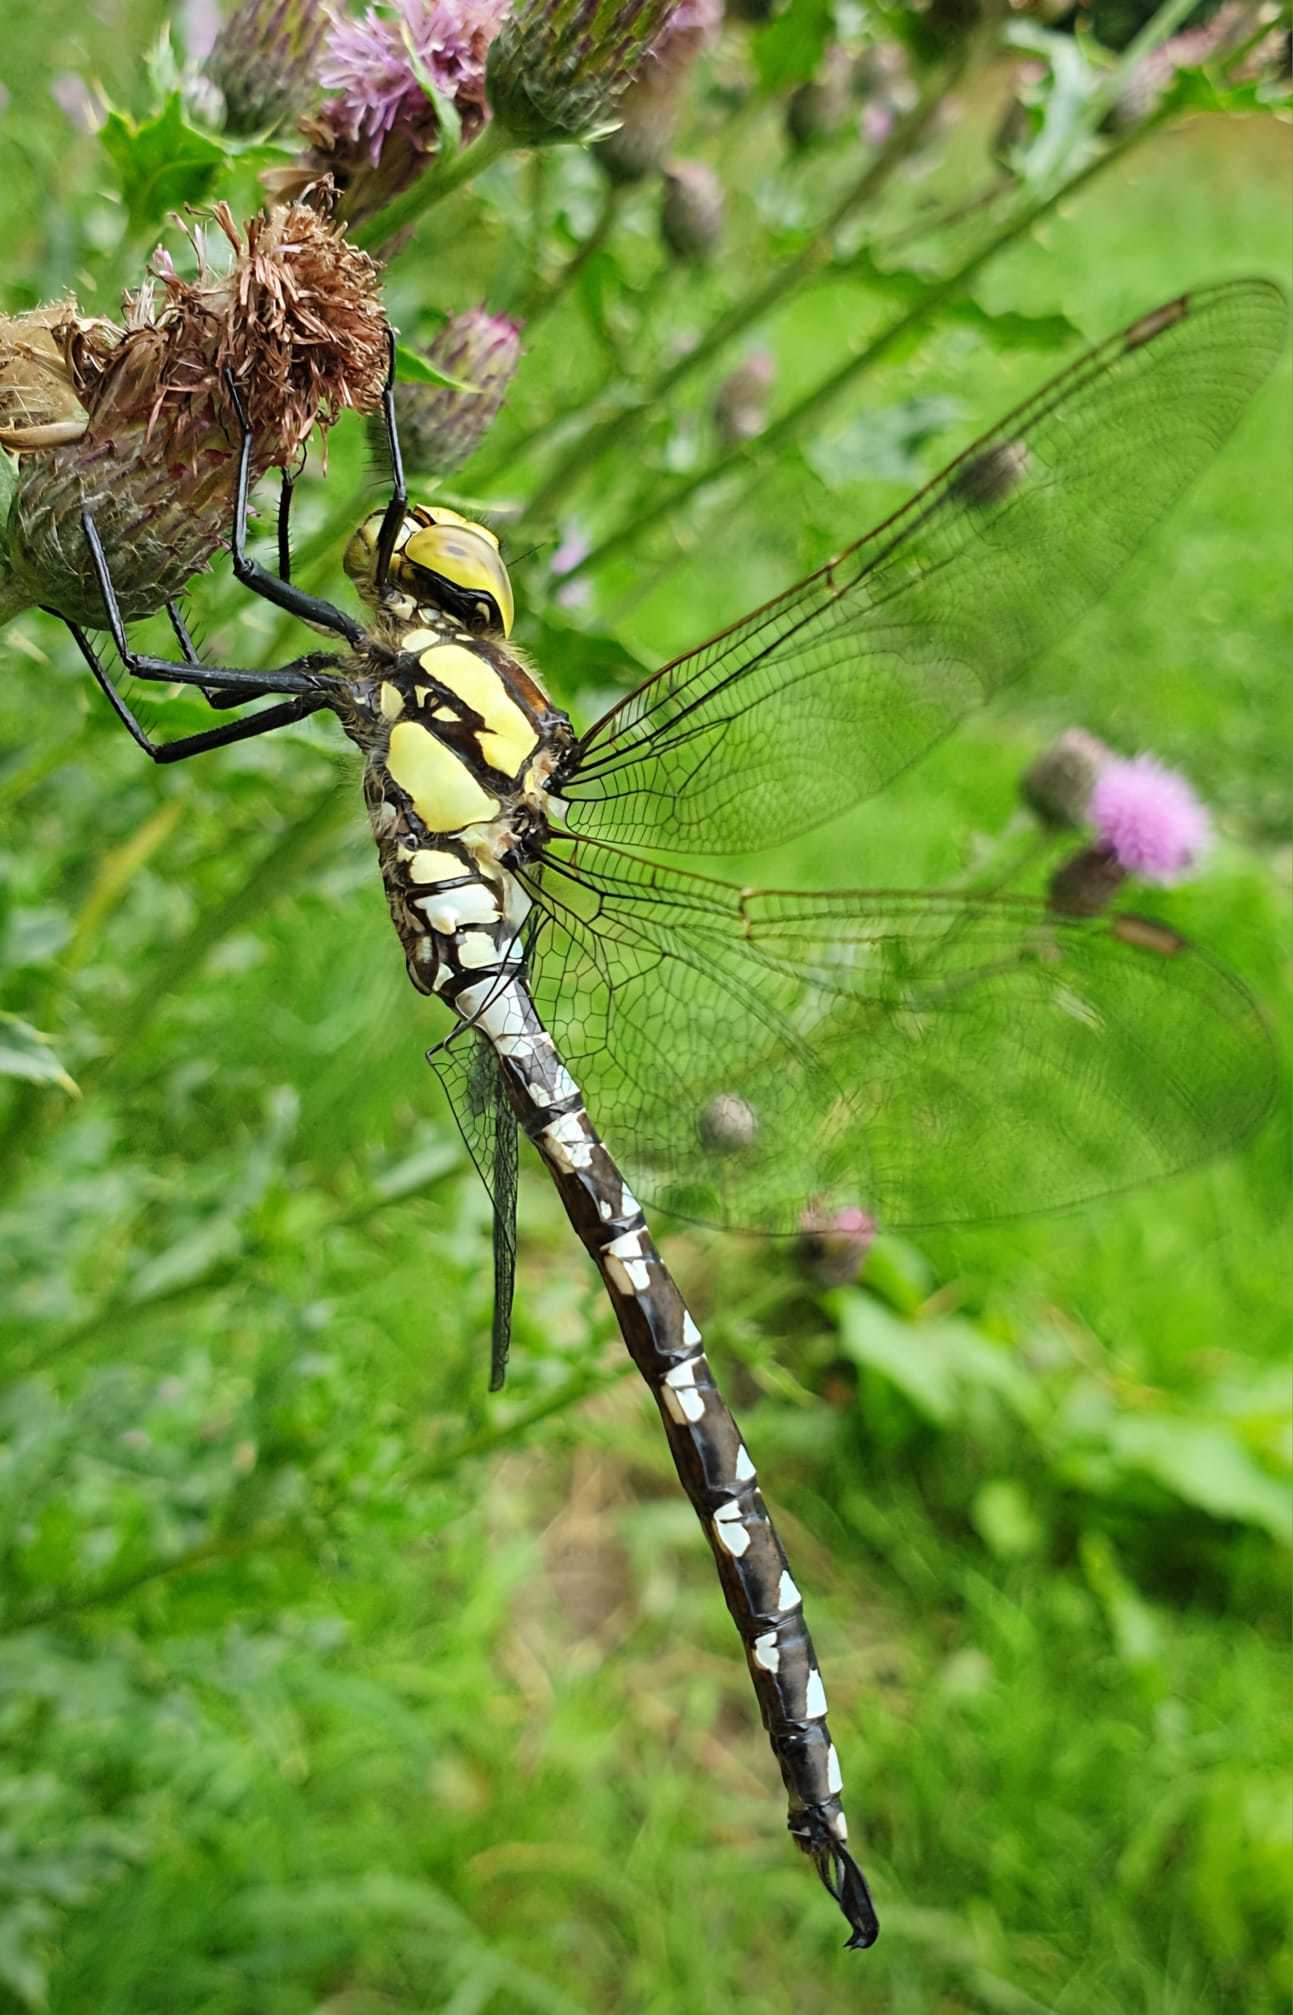 A dragonfly at Arrowe Park by Nigel Boots